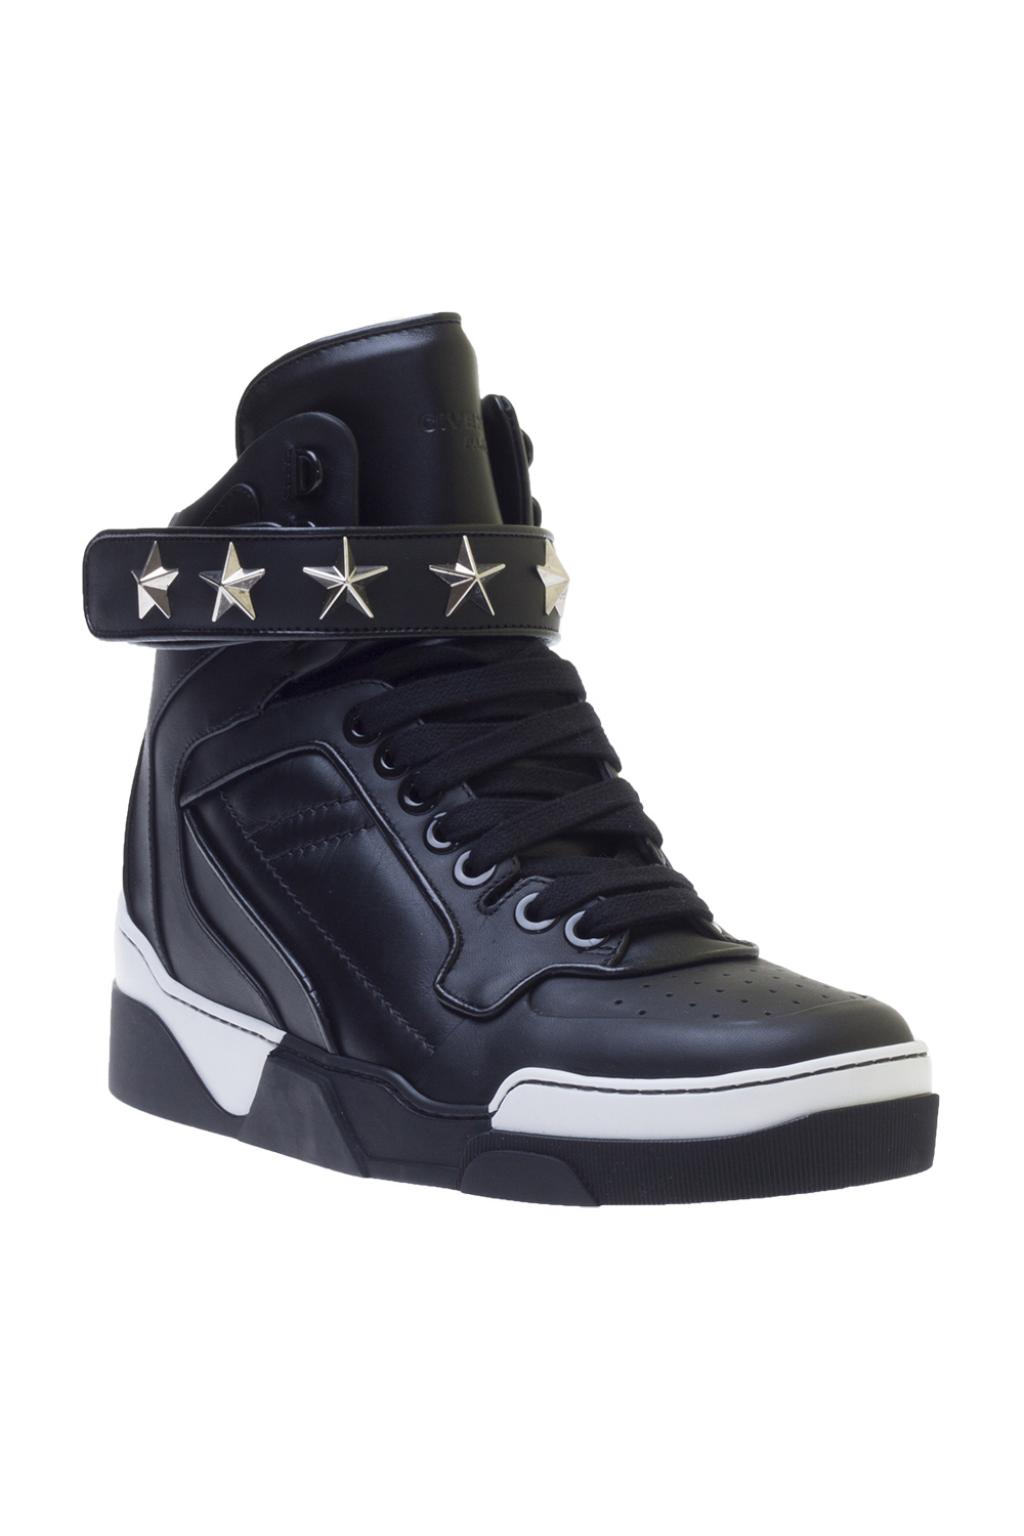 Star Leather Sneakers Givenchy - Vitkac 